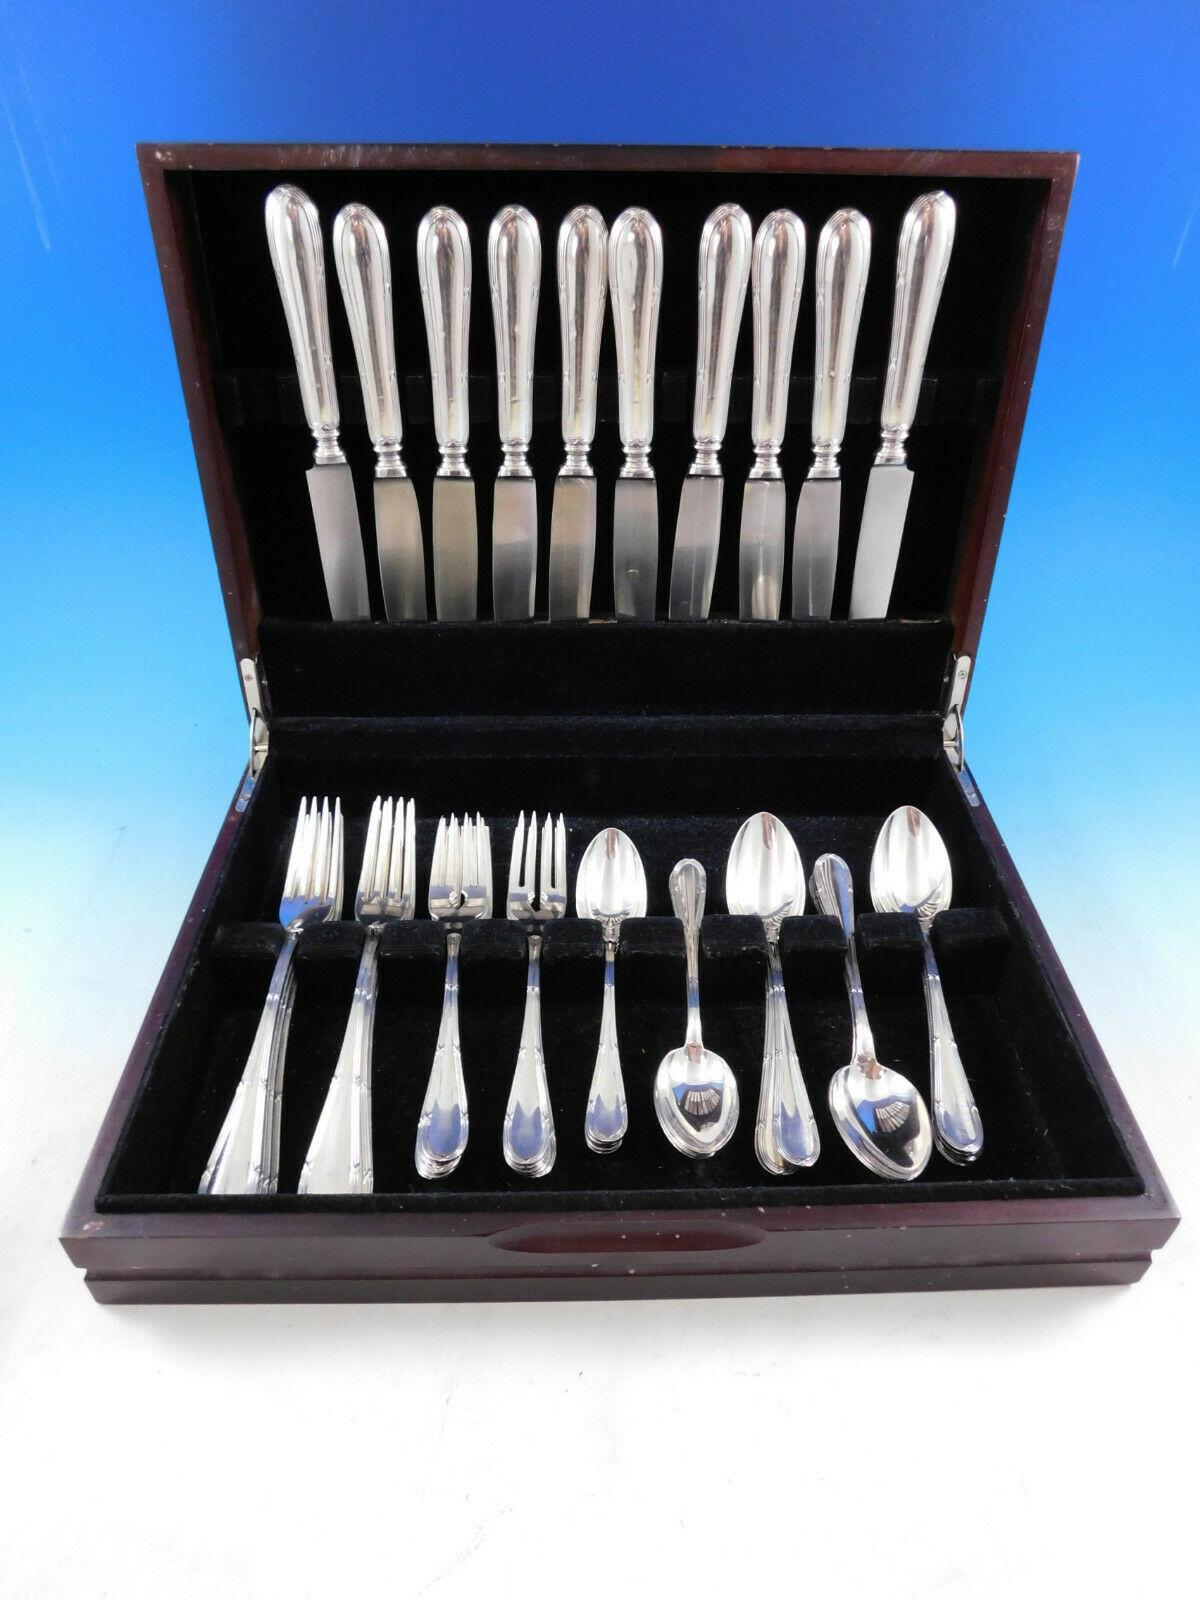 This fabulous Italian design by world renowned Buccellati is a timeless addition to your dining experience. Buccellati is known and admired throughout the world for producing the finest quality Italian silver in large Continental size and heavy